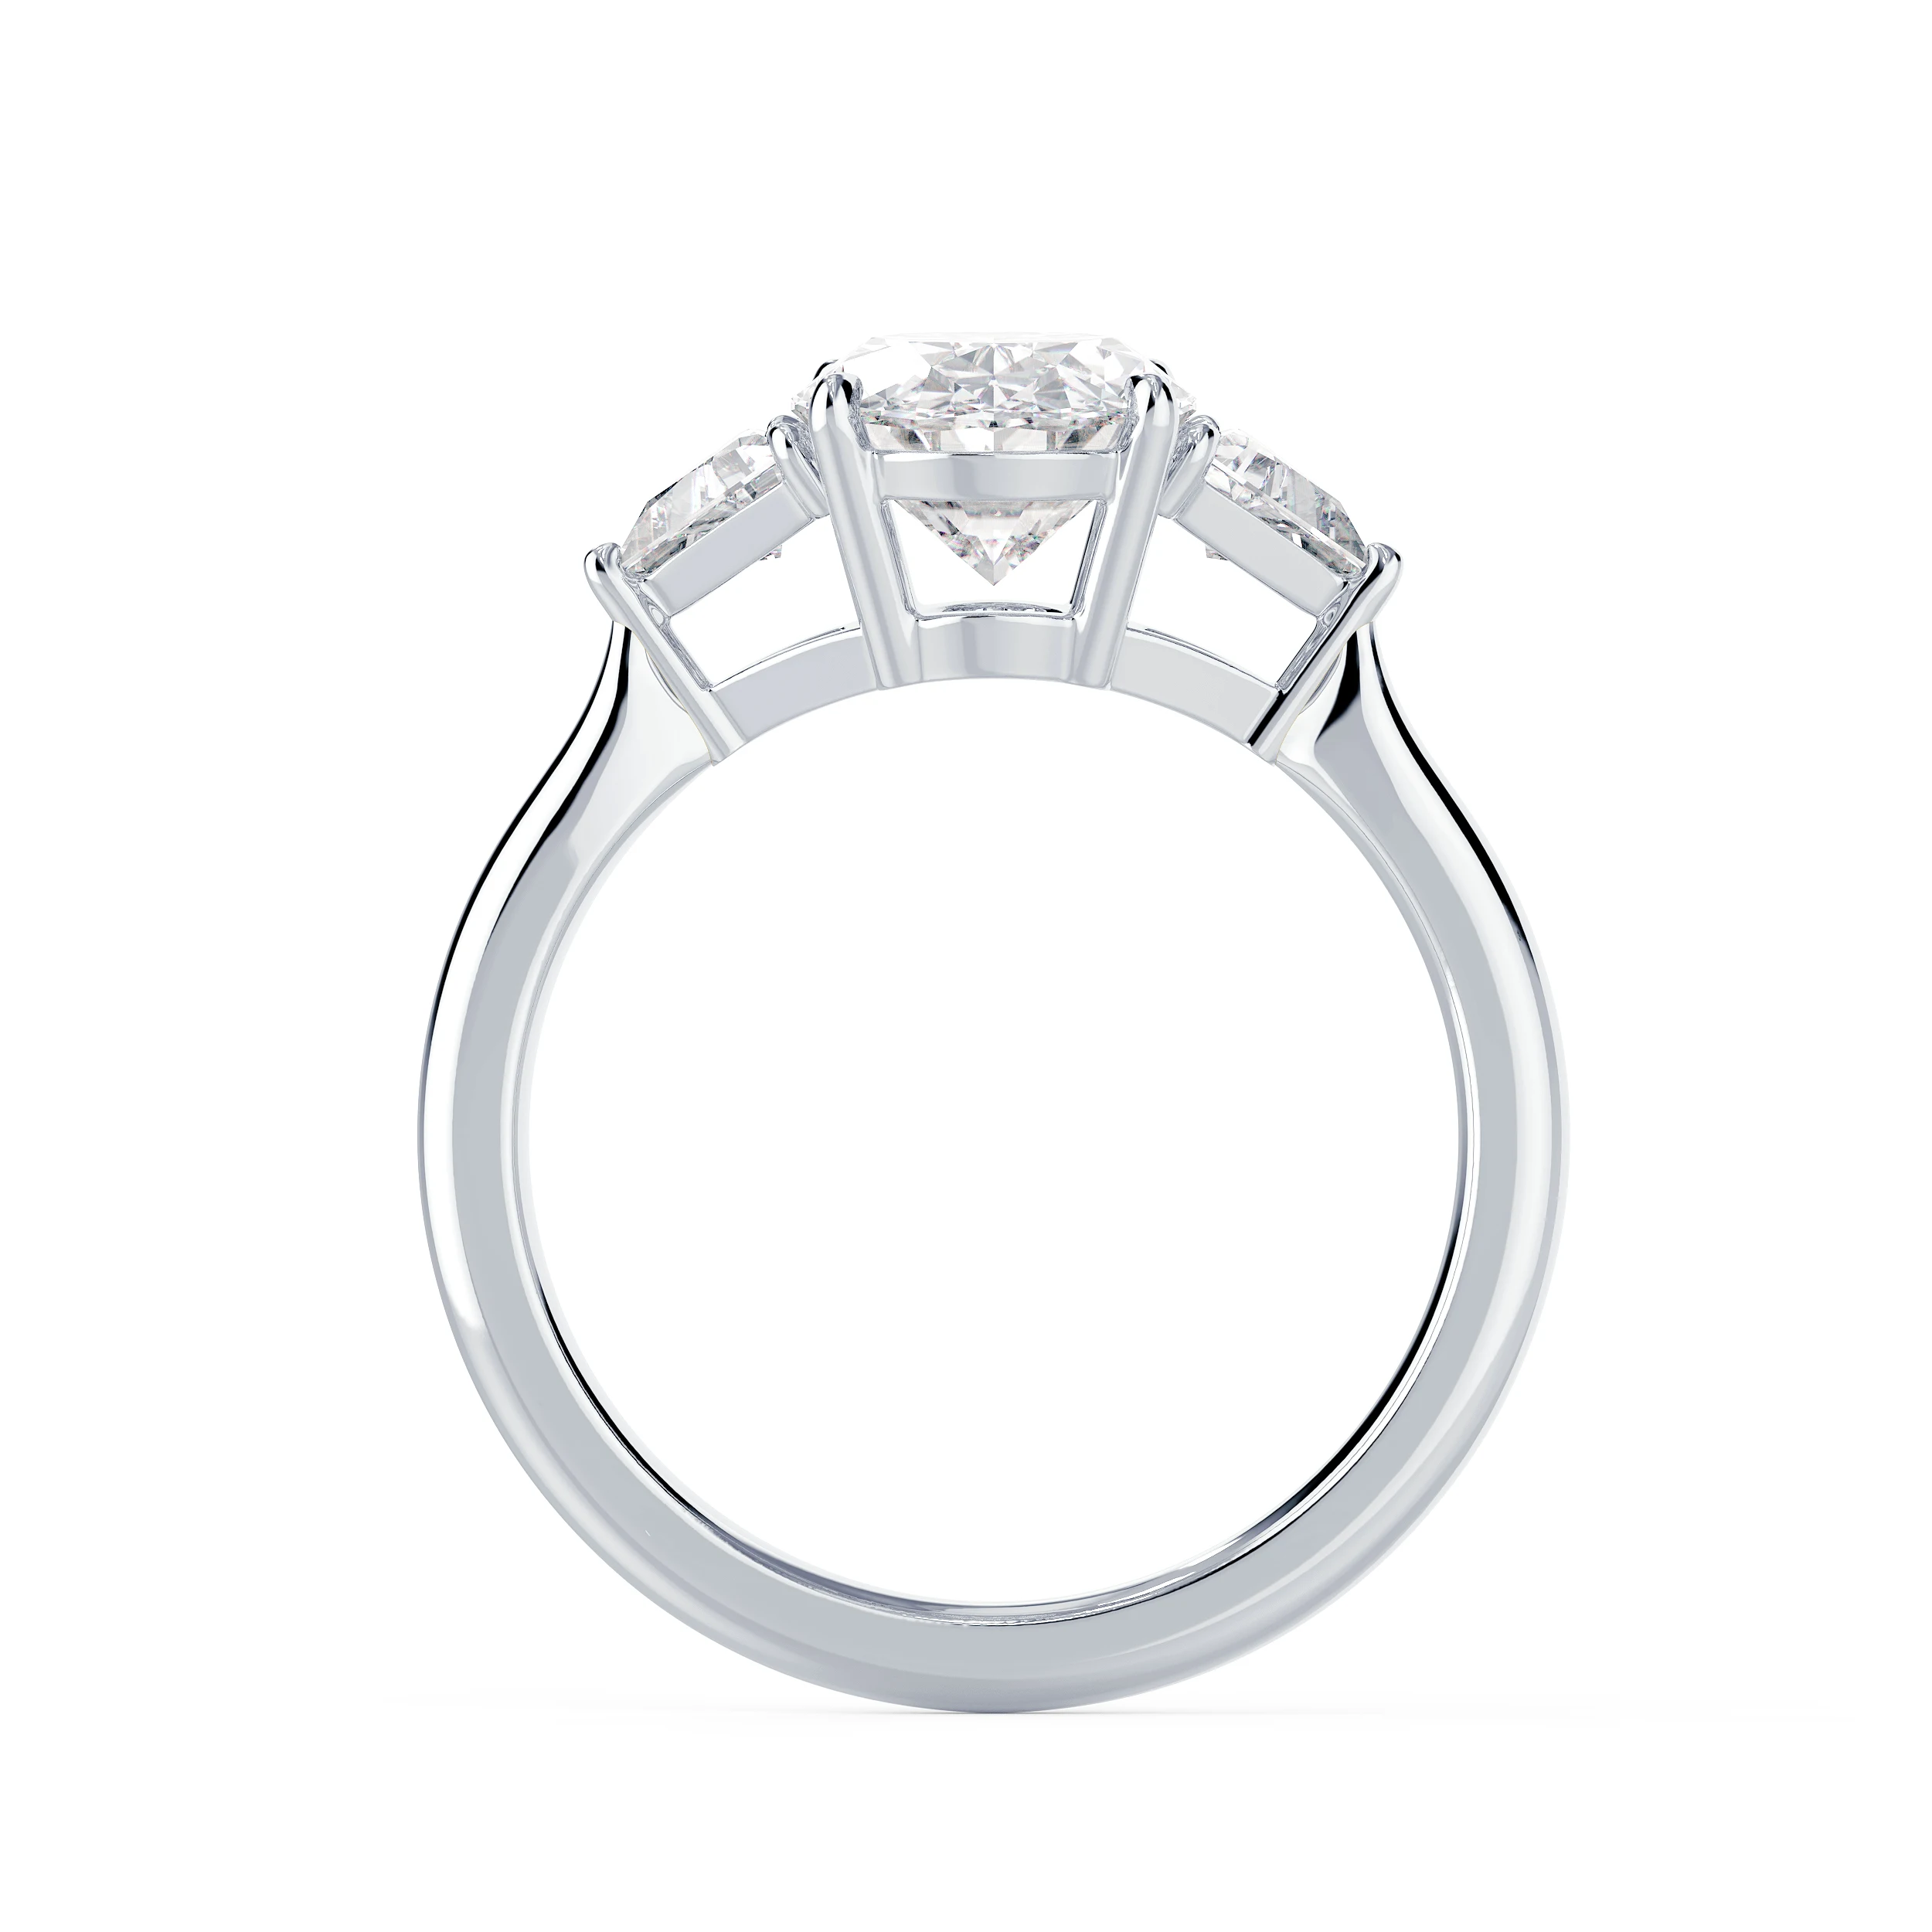 Diamonds Oval and Trillion Diamond Engagement Ring in White Gold (Profile View)